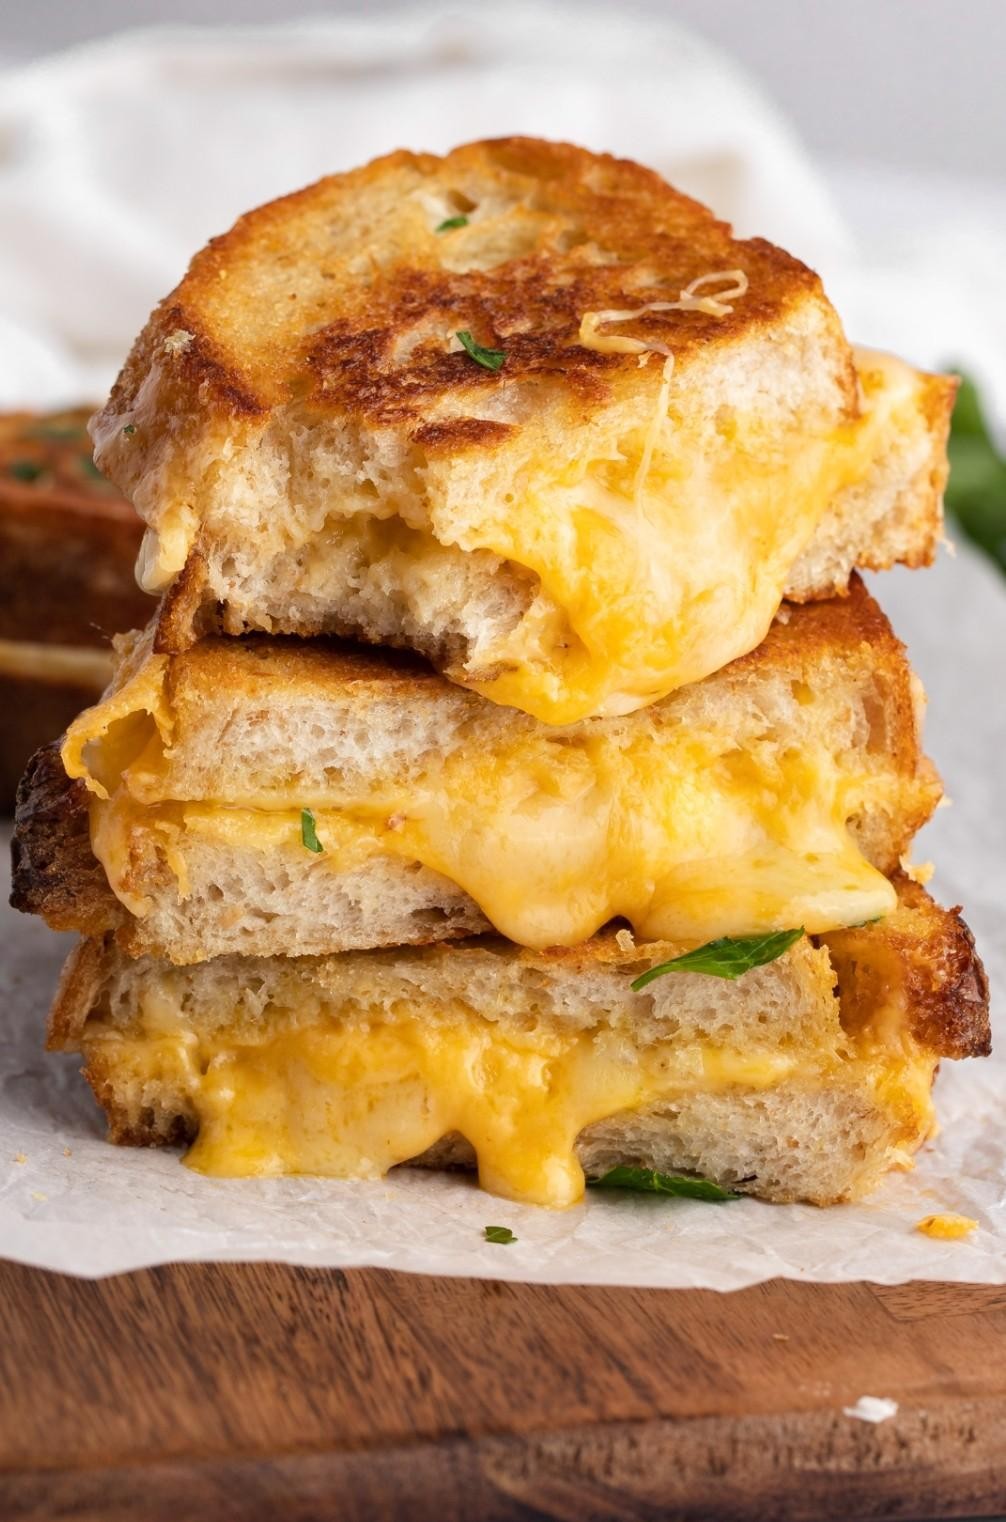 MINI GRILLED CHEESE